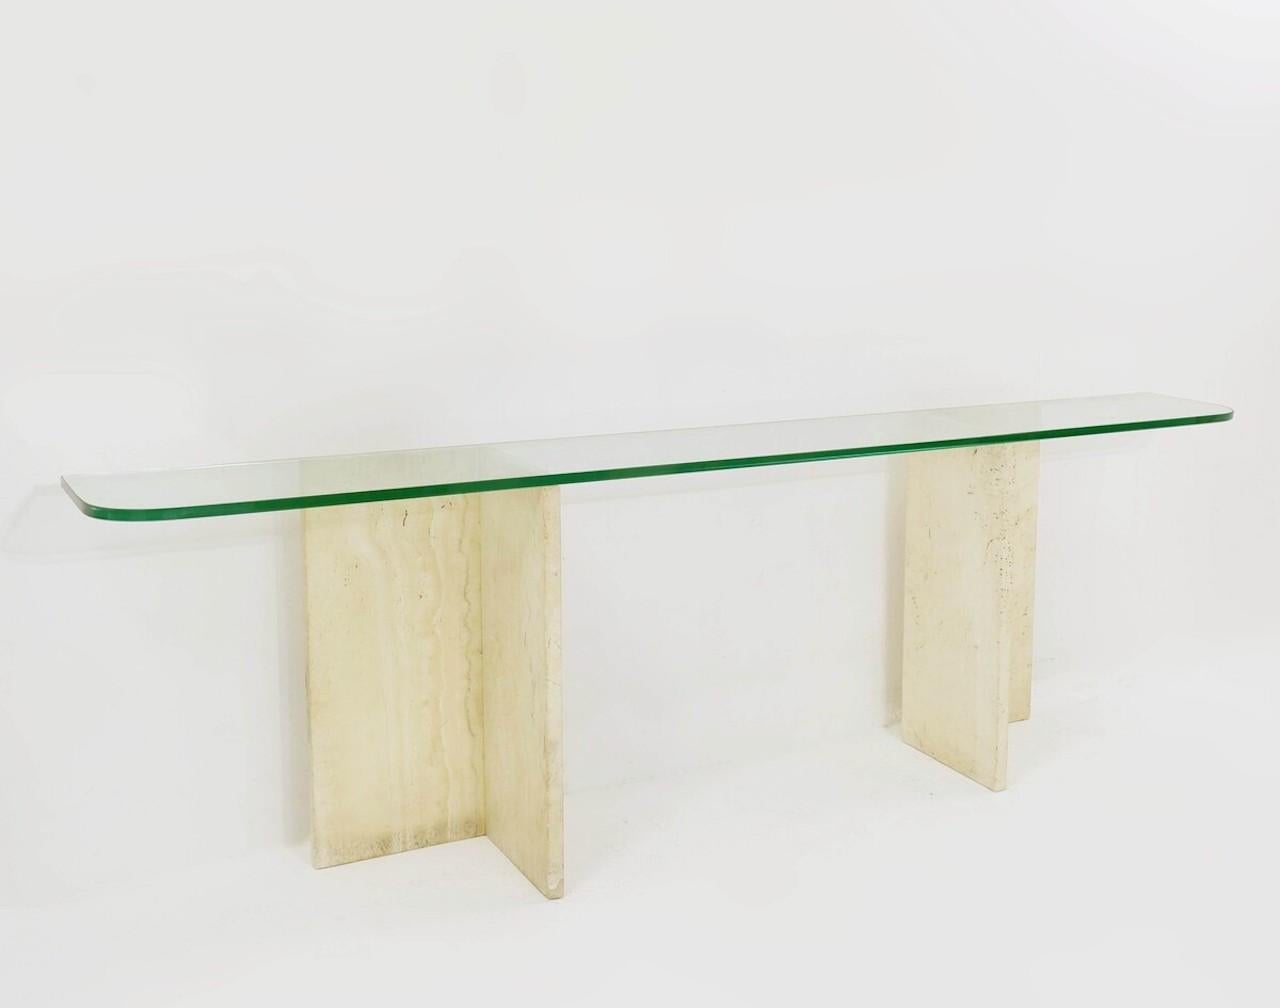 Large Italian Travertine and glass top console table, 1970s.